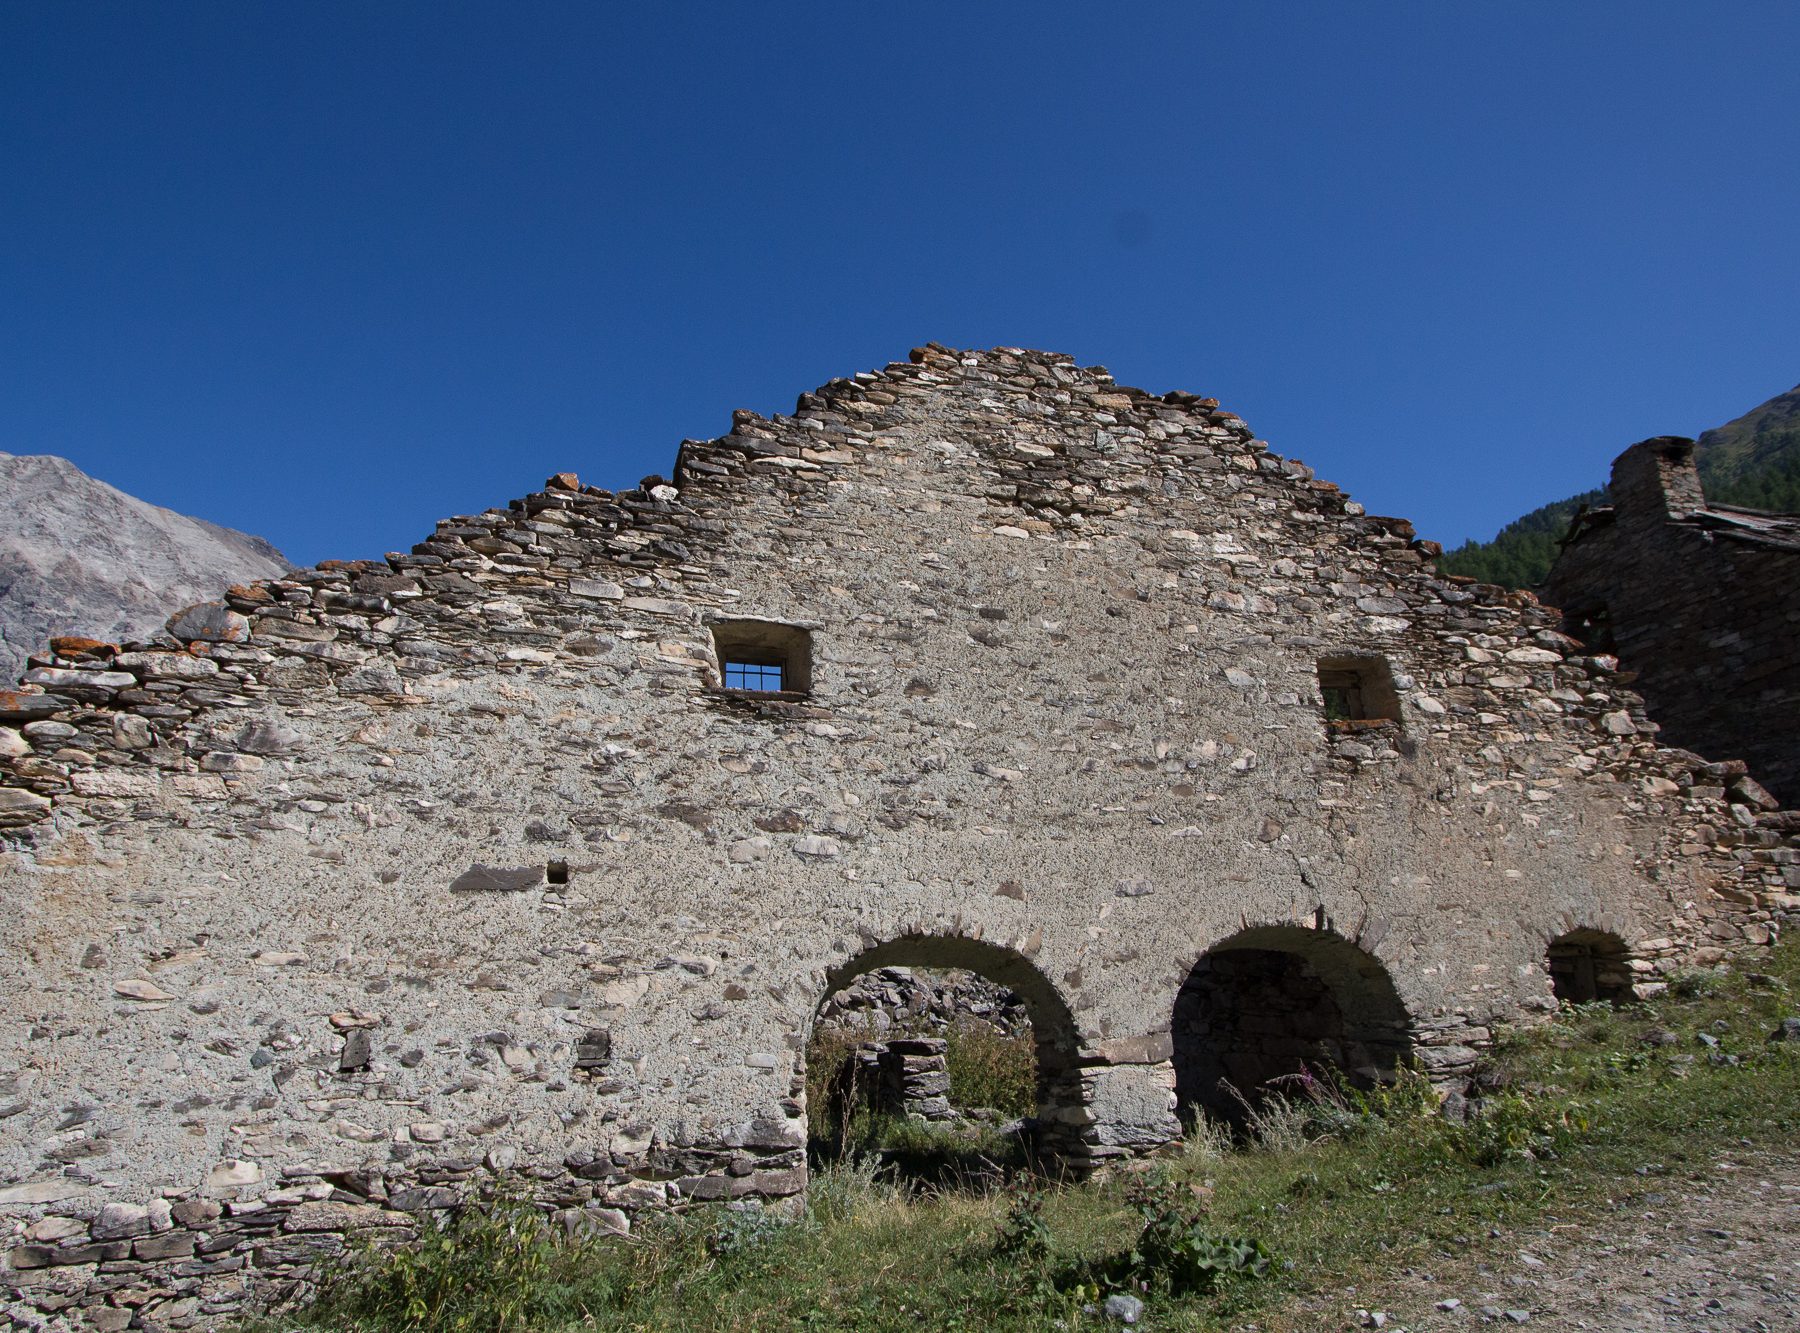 Remains of an old "grangia" (local mountain construction) in Chabaud, 2017